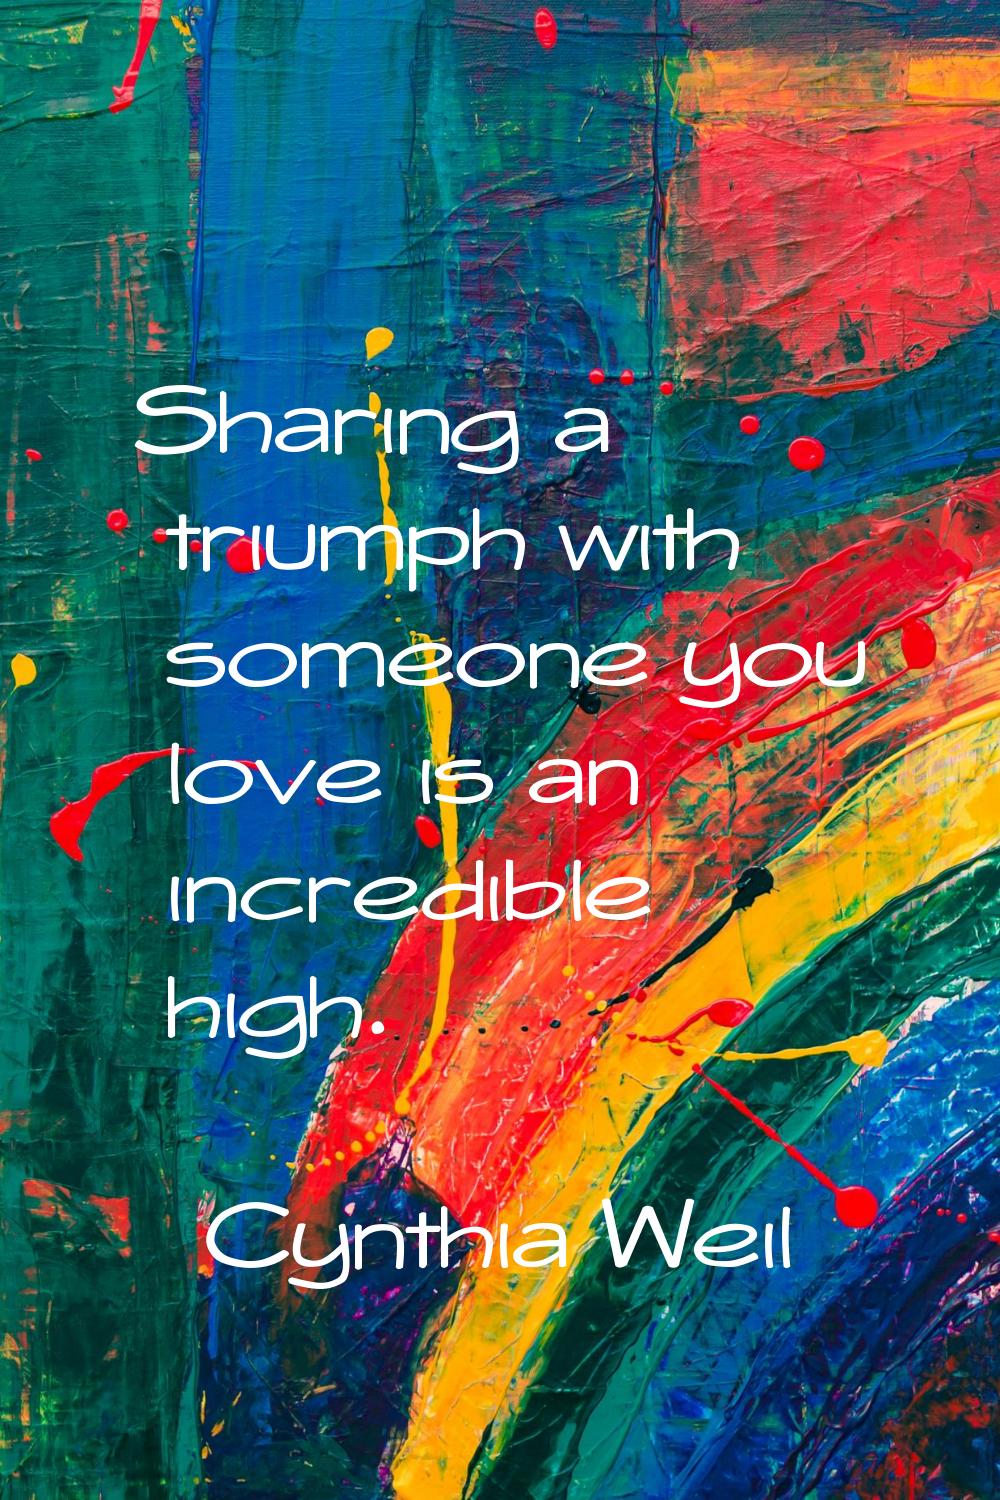 Sharing a triumph with someone you love is an incredible high.